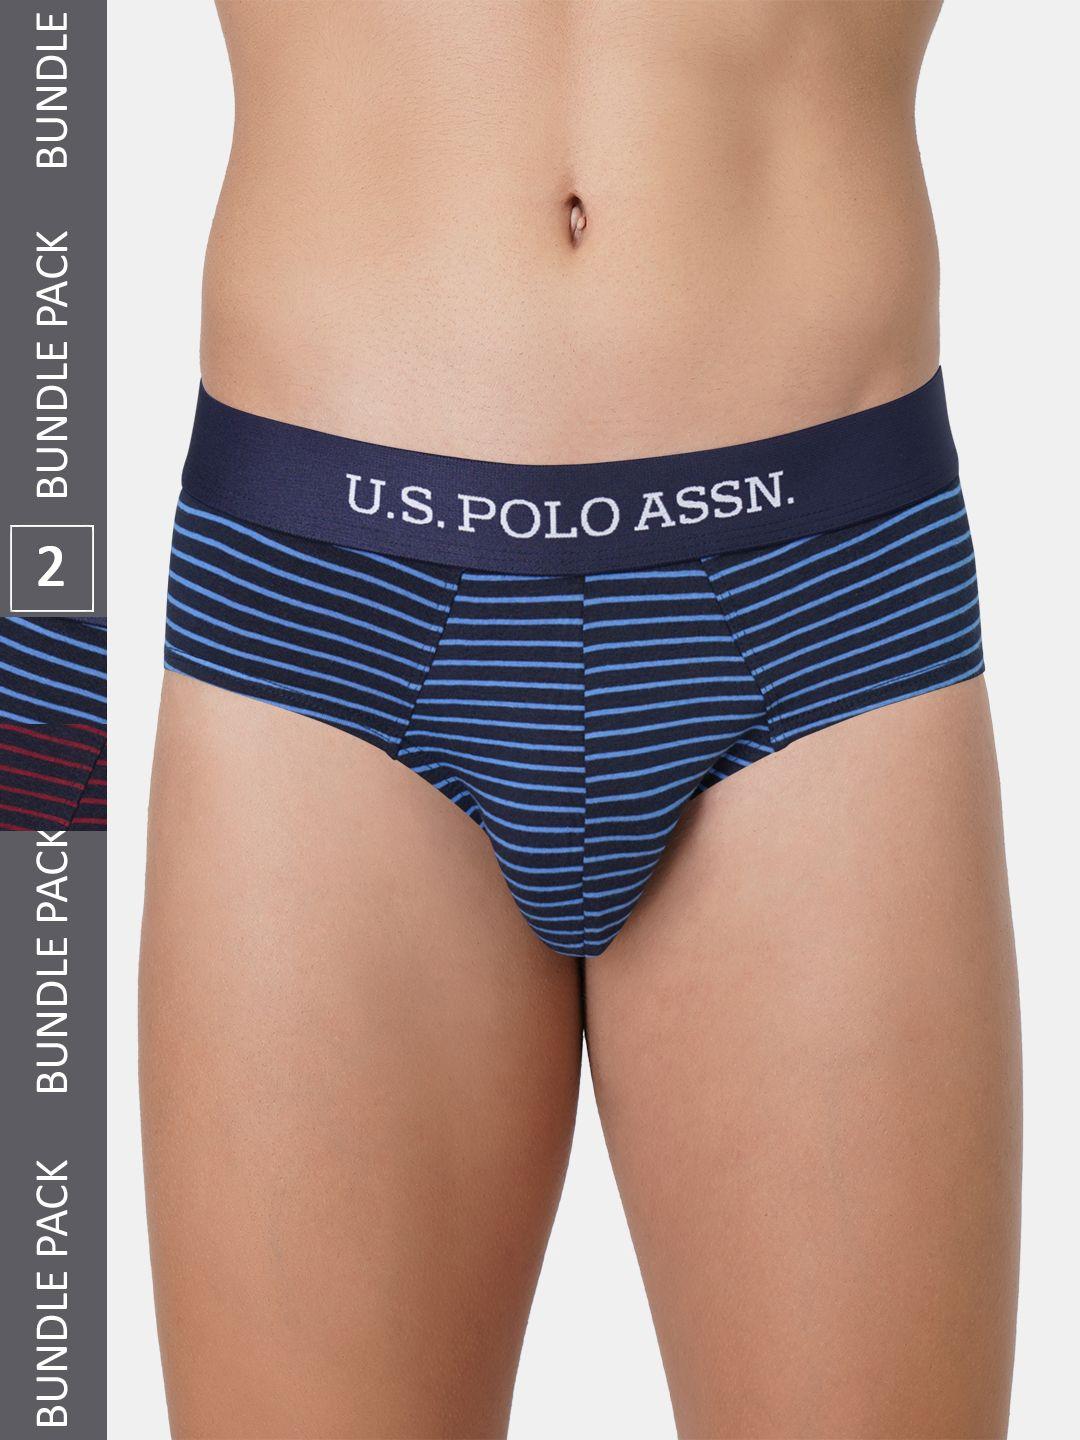 u.s.-polo-assn.-men-pack-of-2-striped-anti-bacterial-basic-briefs